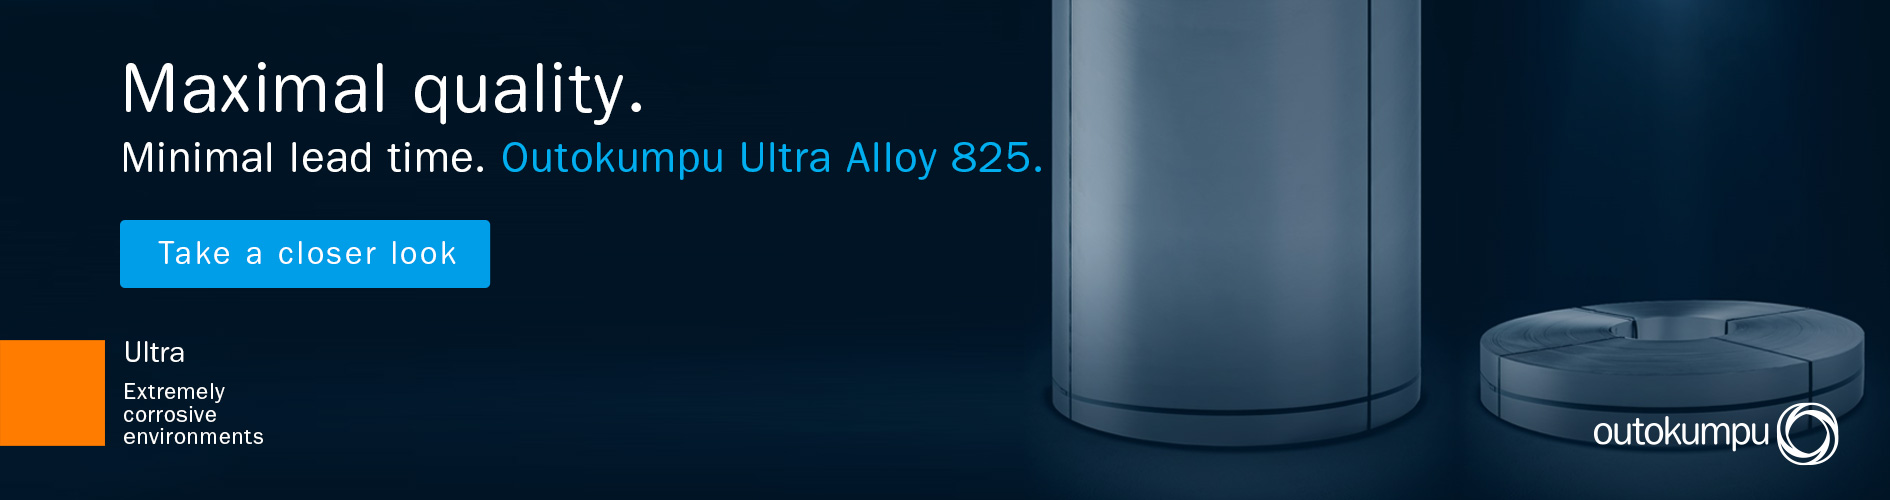 Ultra Alloy 825 campaign banner